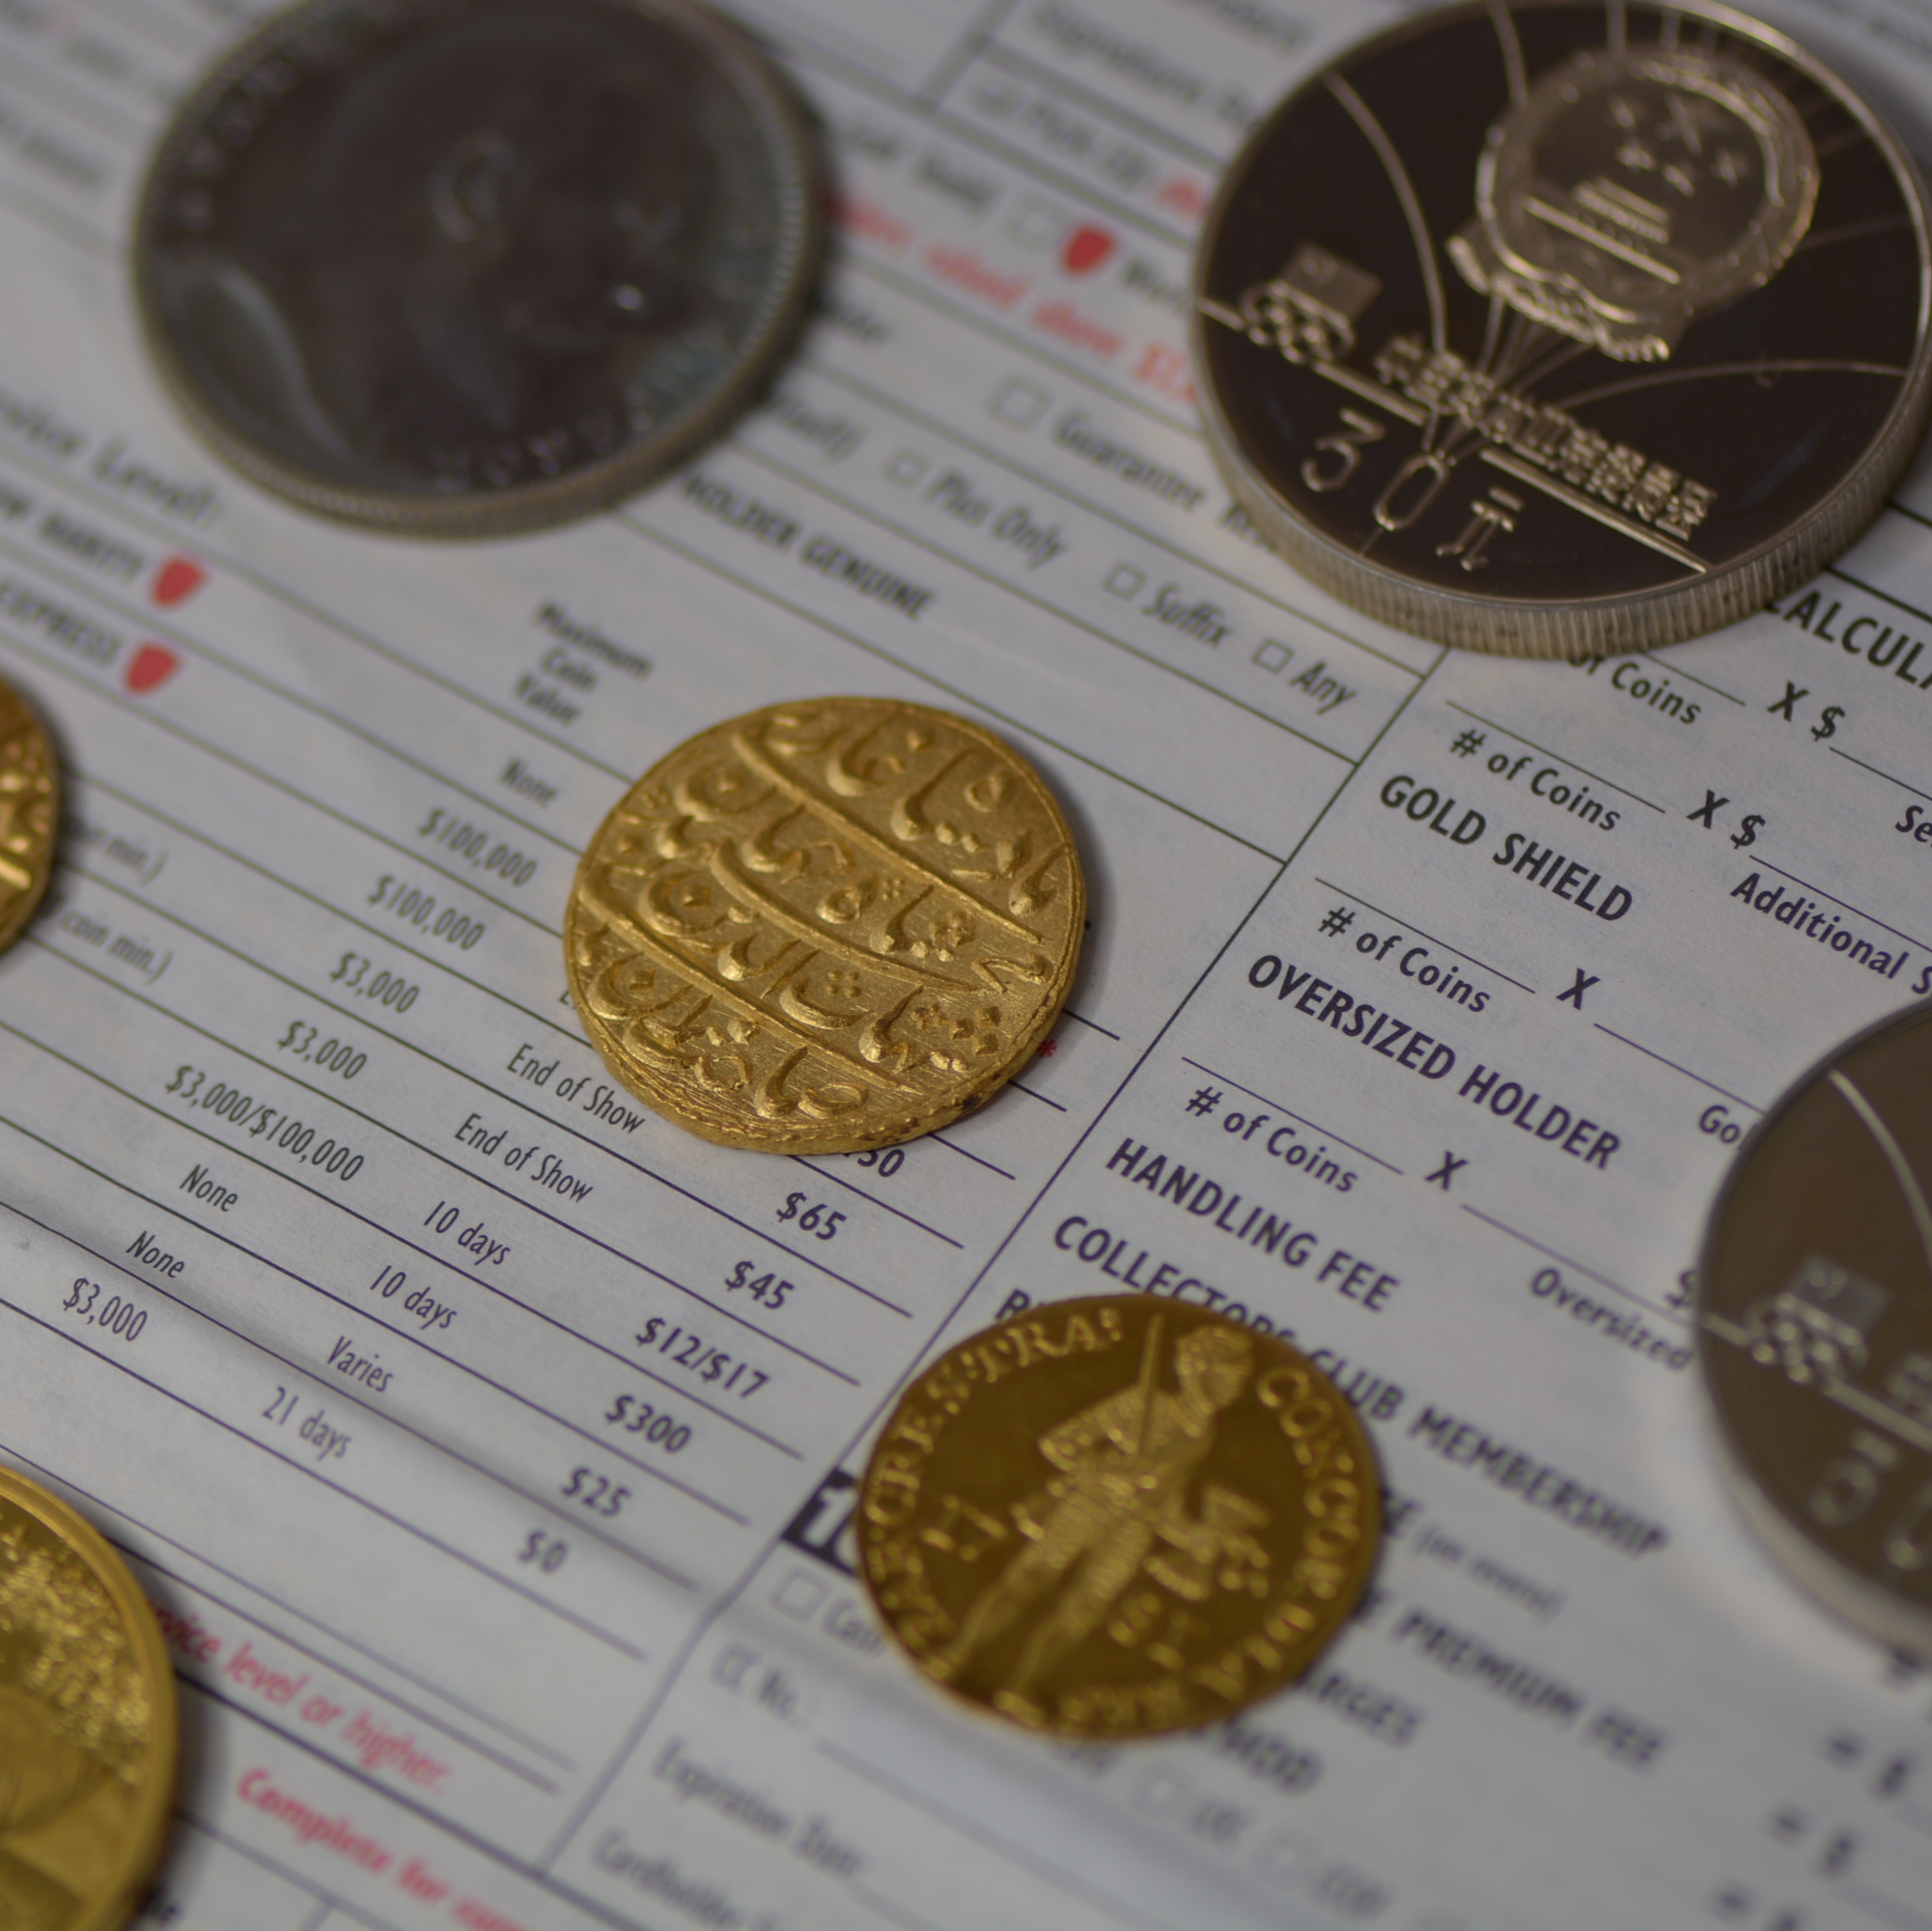 The art and science of coin collecting